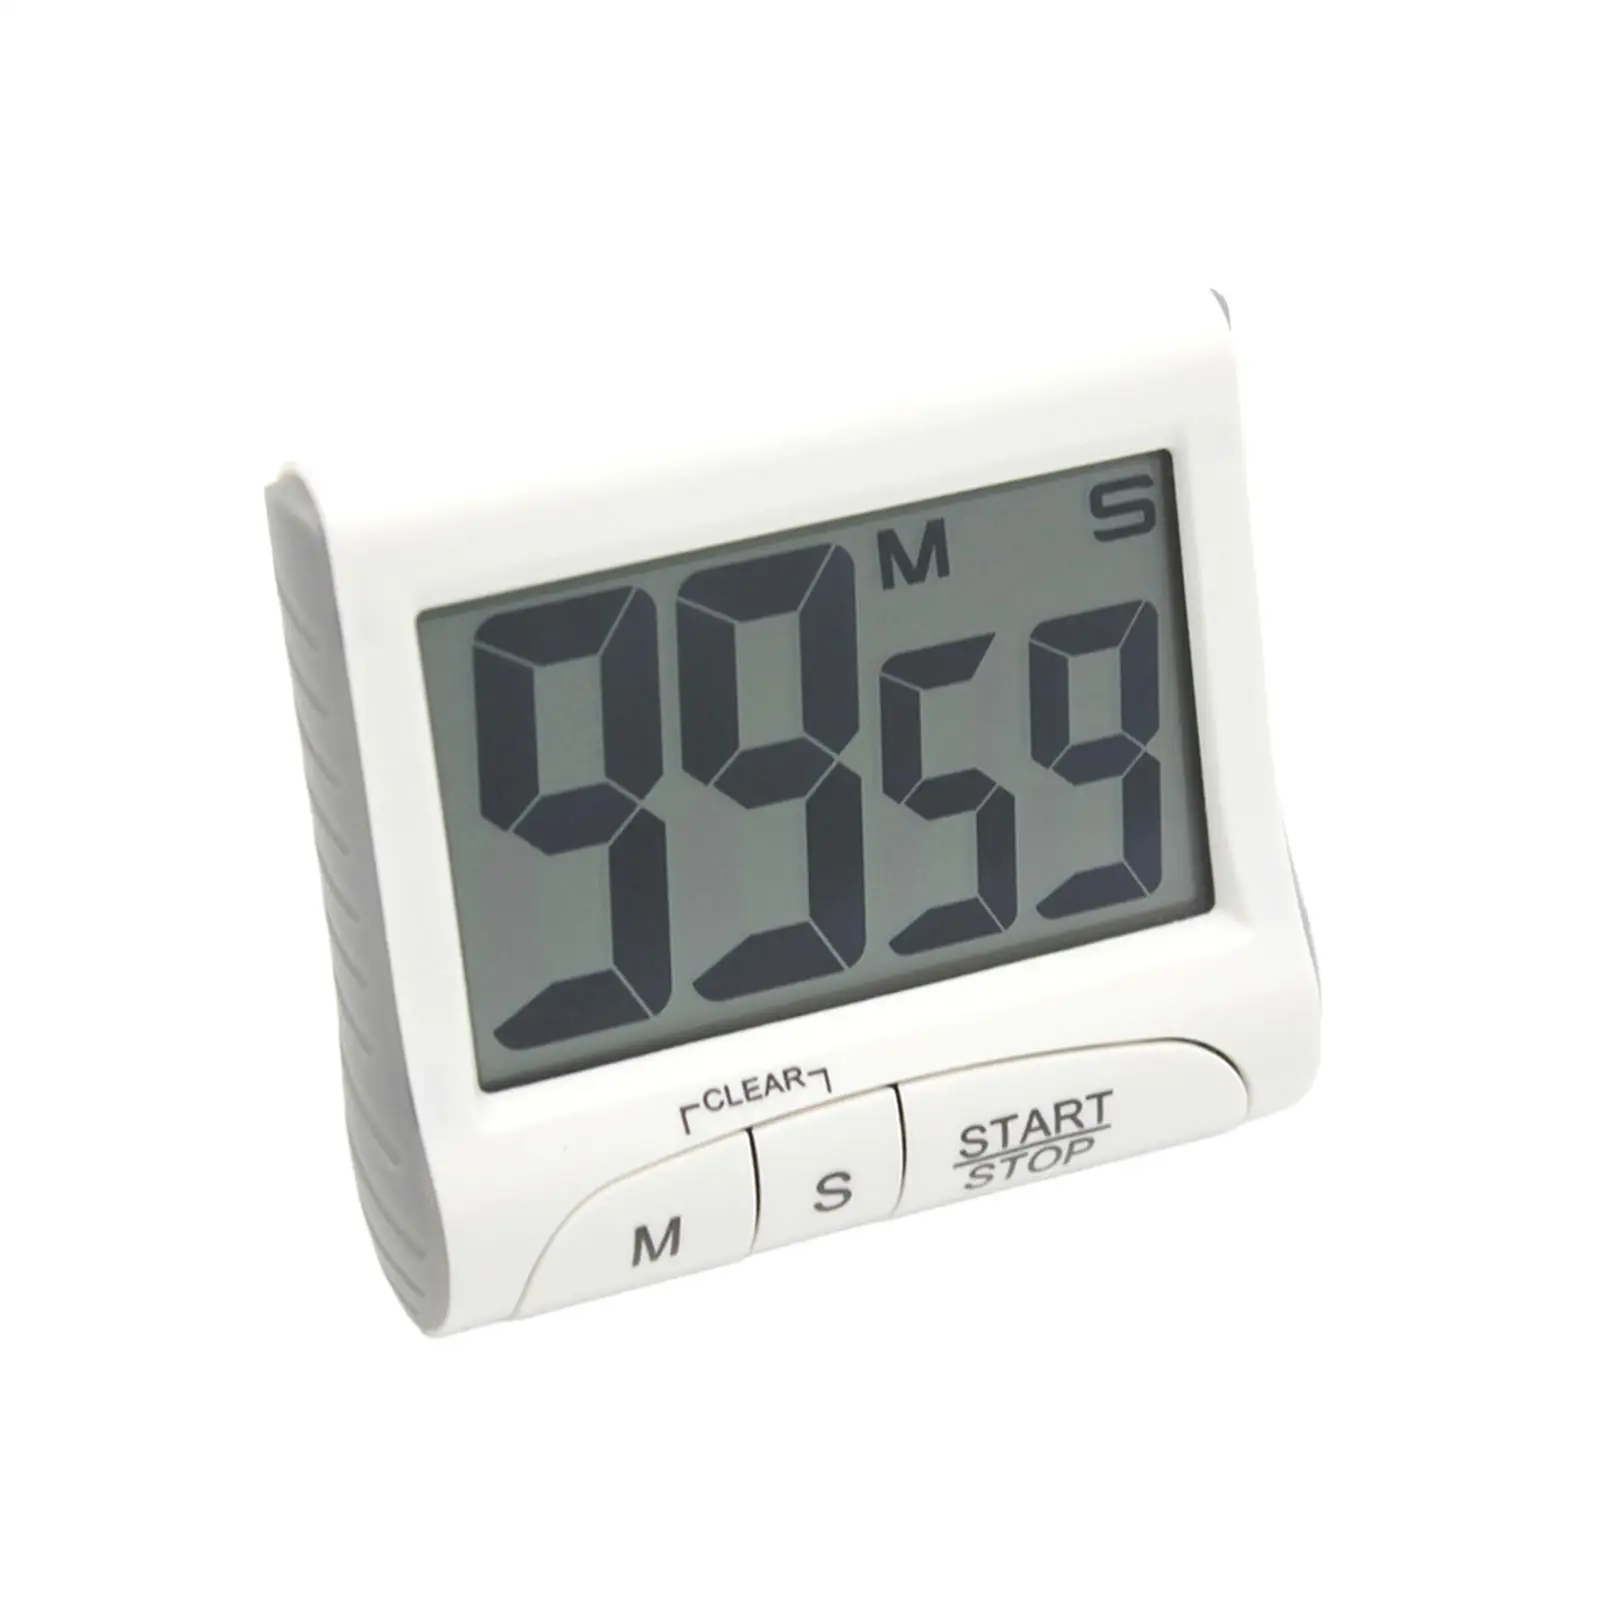 Digital Kitchen Timer Large LCD Display Loud Beeper Electronic Timer Cooking Timer for Game Baking Classroom Teaching Exercising